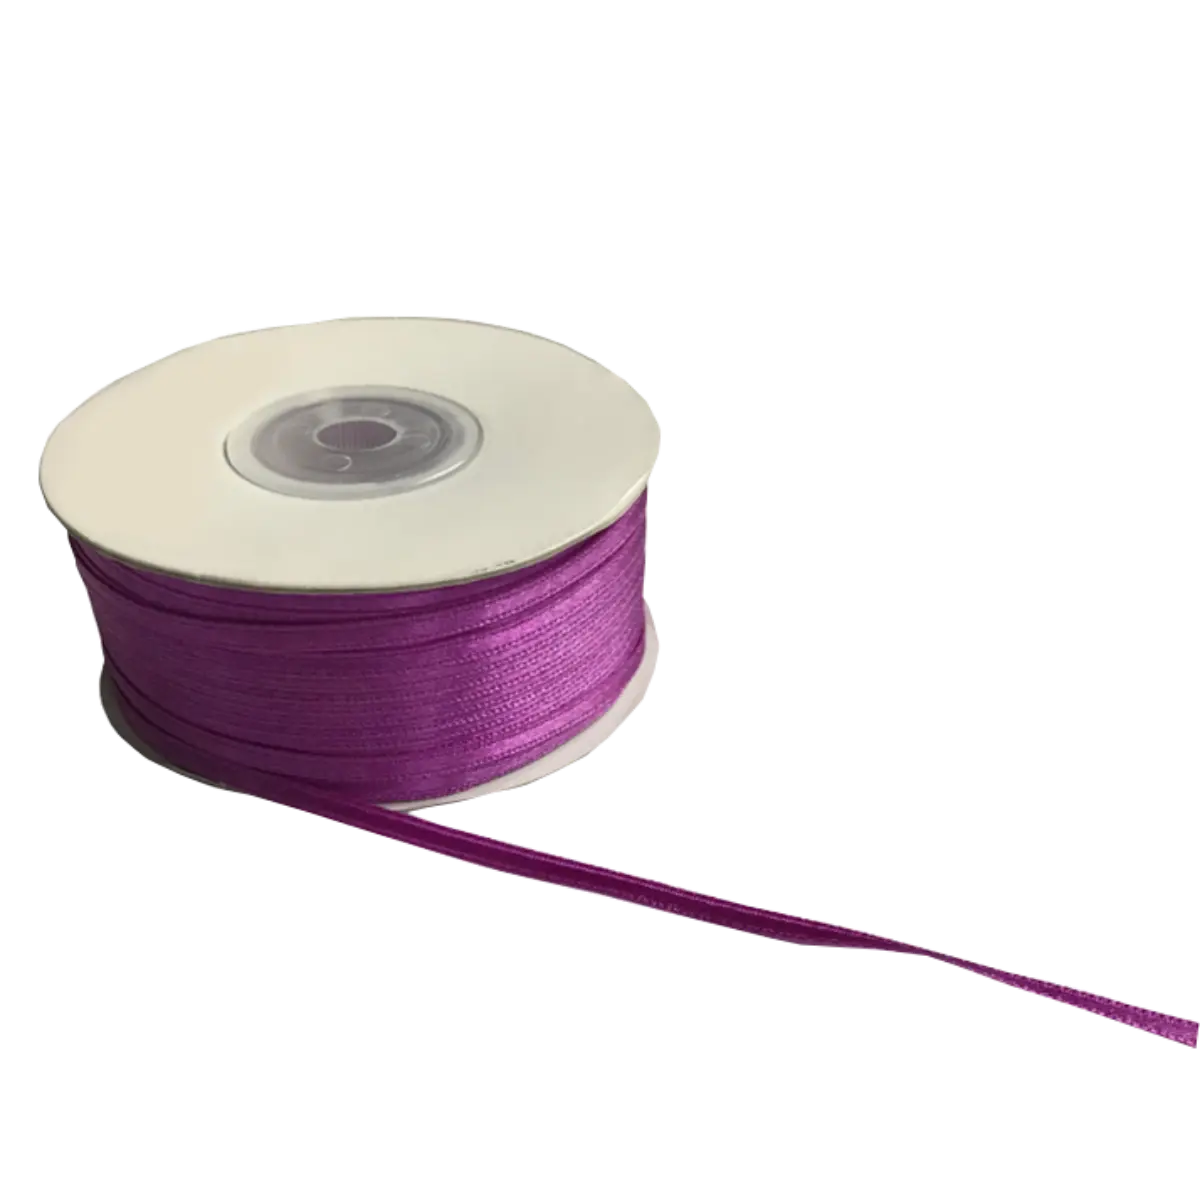 Purple Double Sided Satin Ribbons - 3mm Wide By 100mts